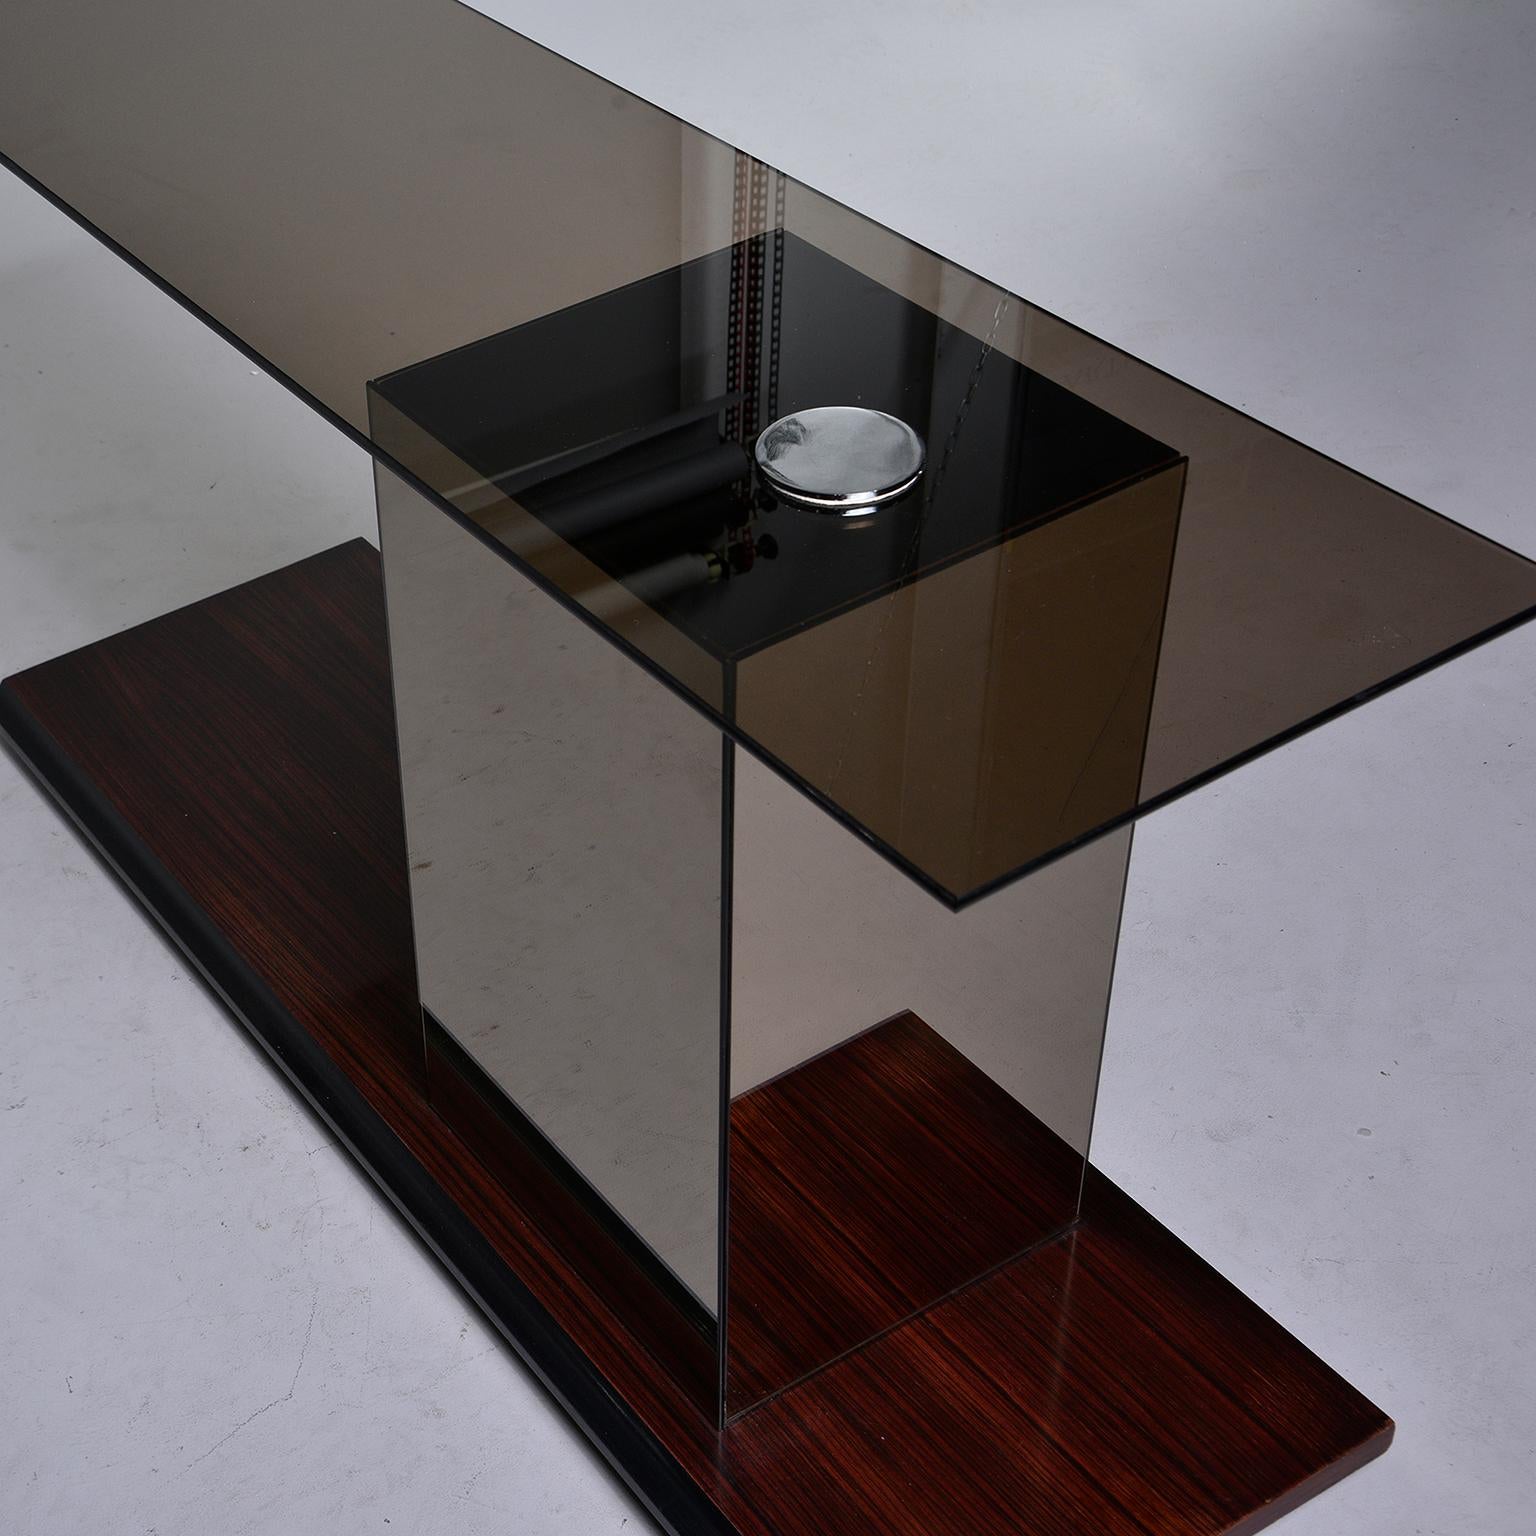 Modernist style Italian console features a walnut base, mirrored off-center support and smoke colored glass tabletop affixed with chrome disk, circa 1970s. Unknown maker.